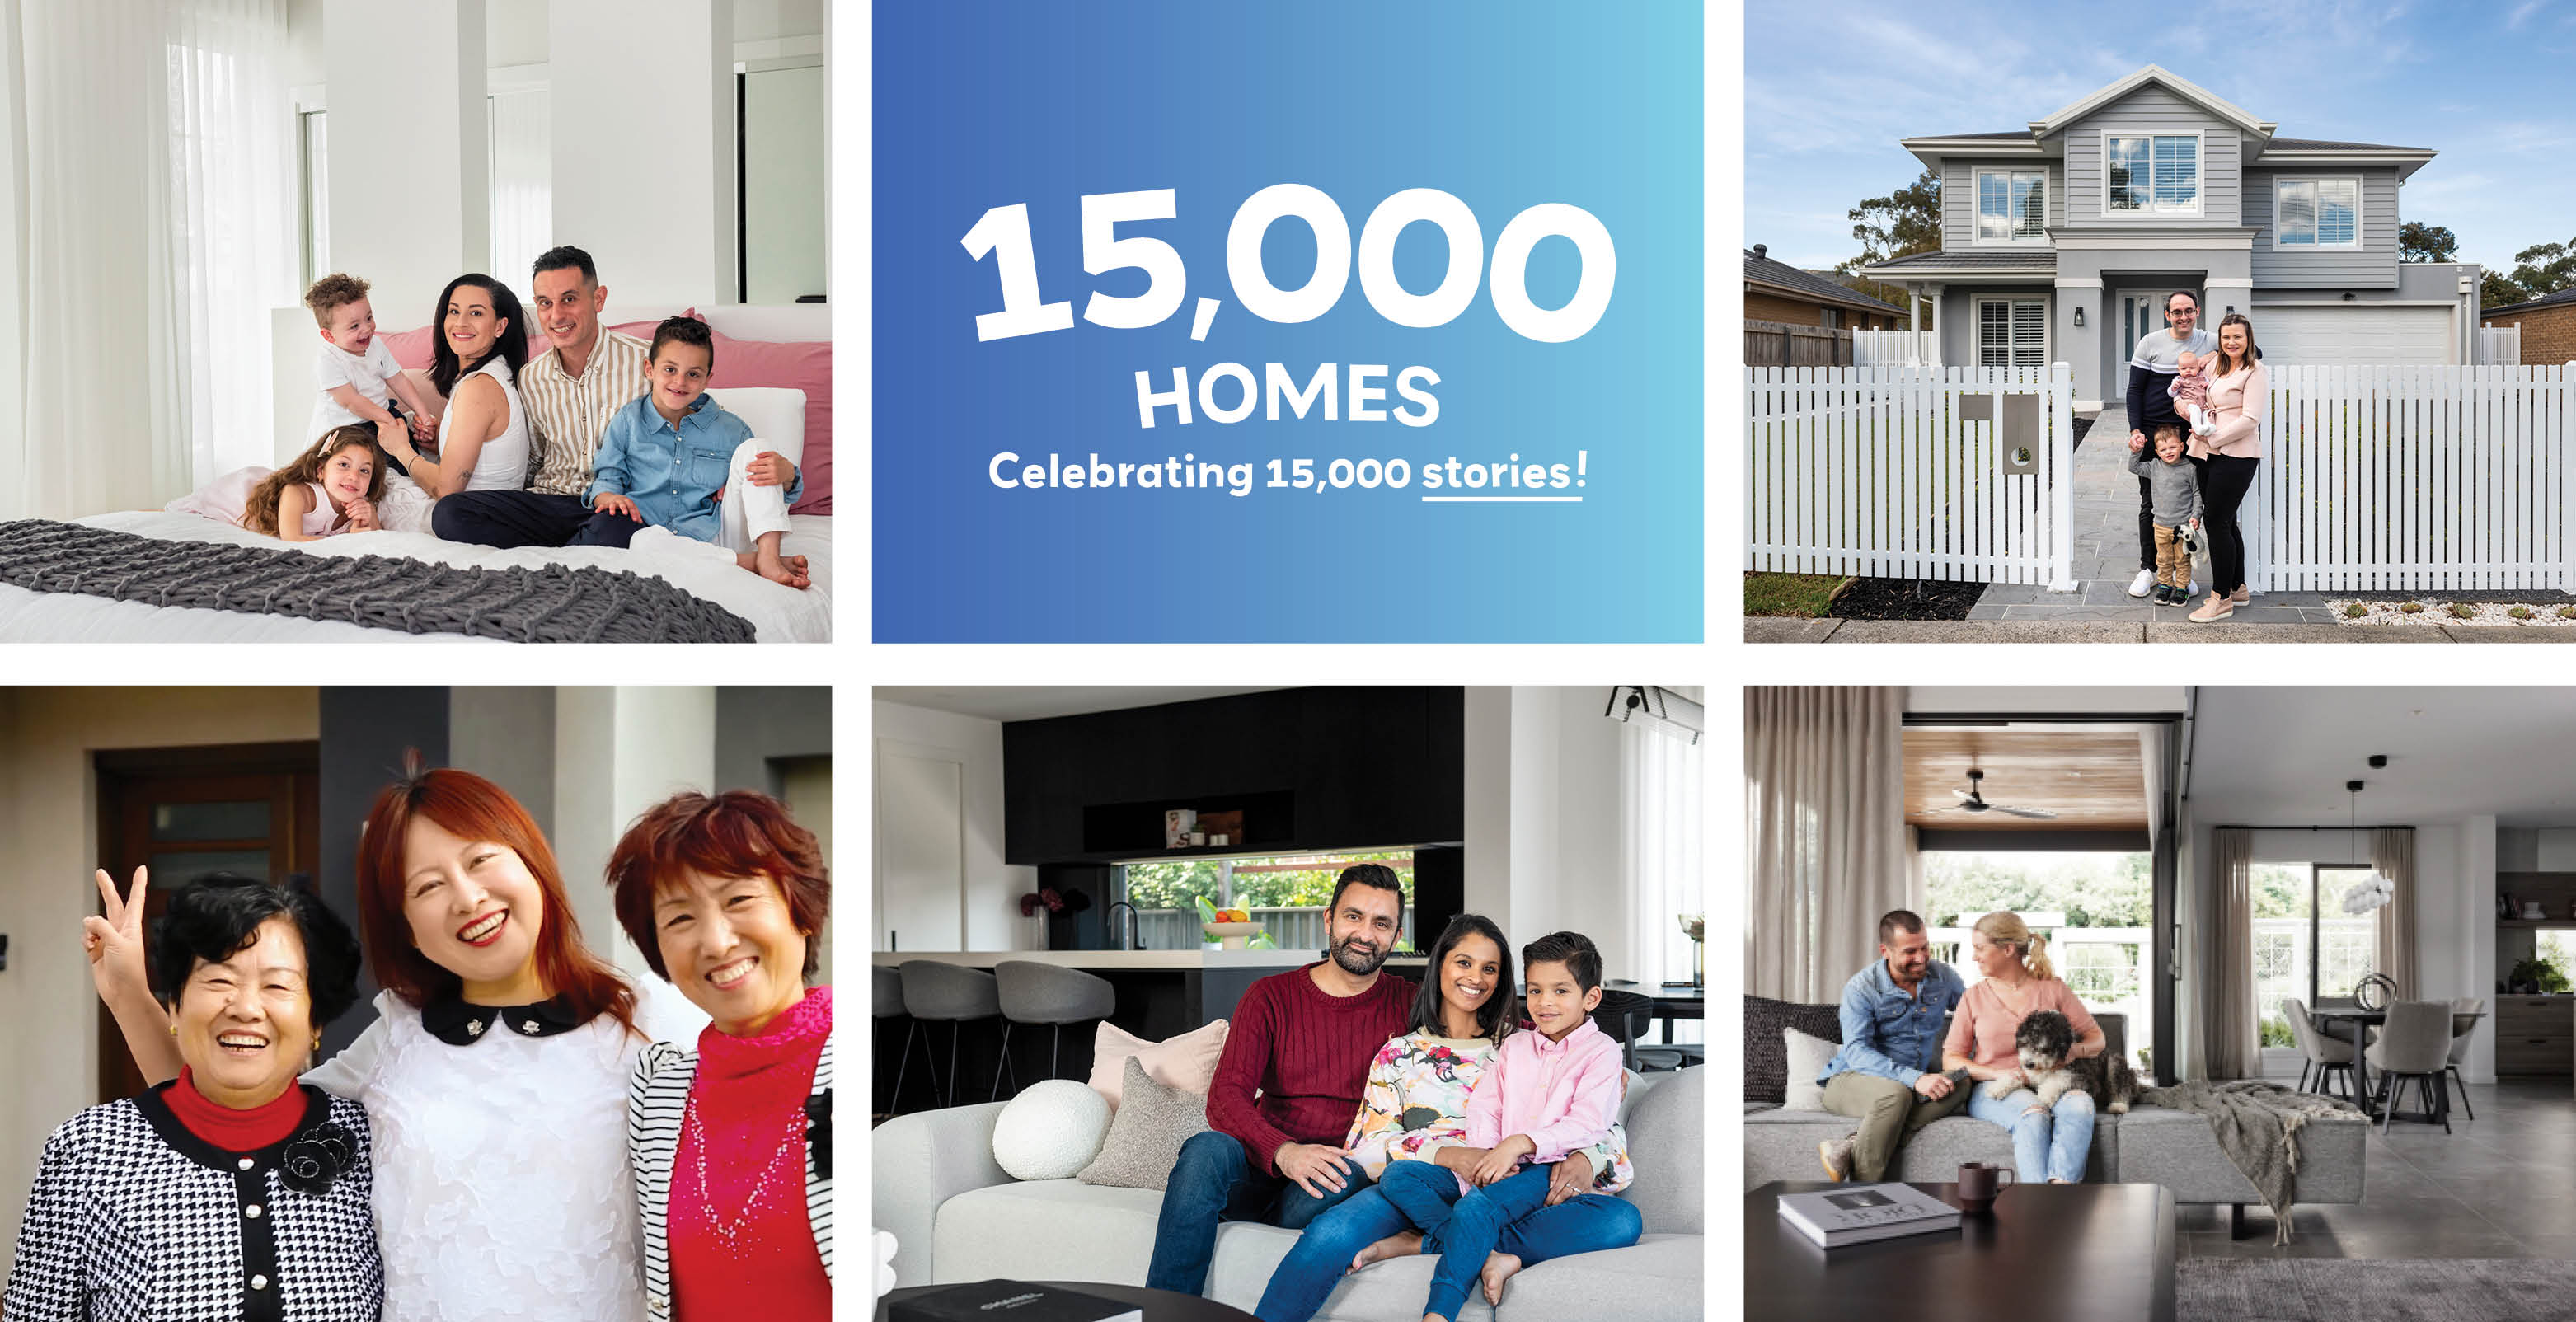 This month marks an incredible milestone for Carlisle Homes – we’re handing over the keys to our 15,000th home.